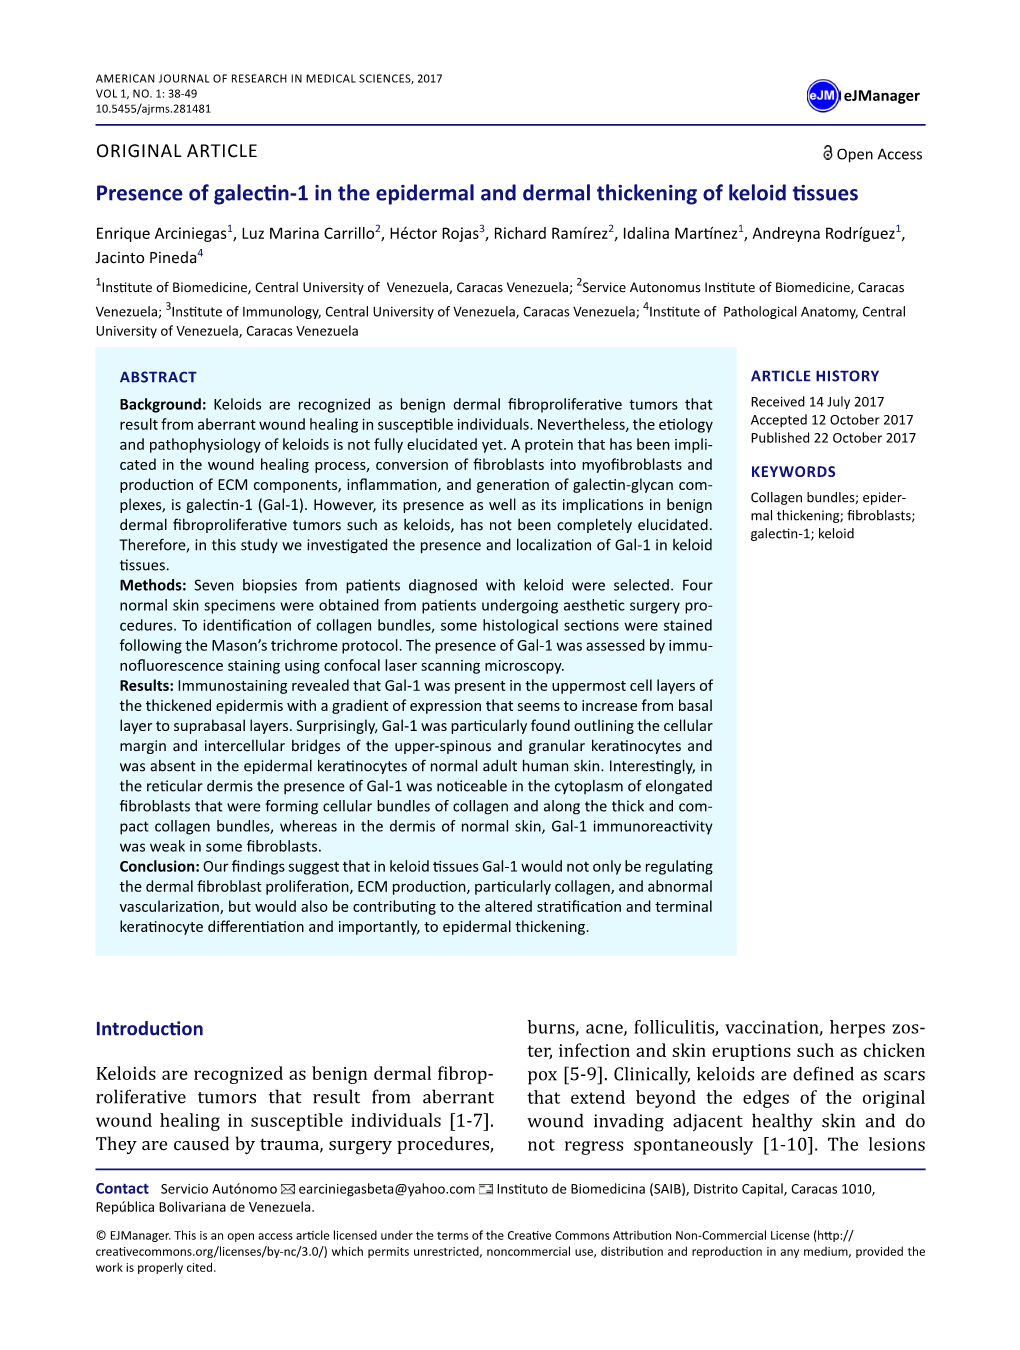 Presence of Galectin-1 in the Epidermal and Dermal Thickening of Keloid Tissues